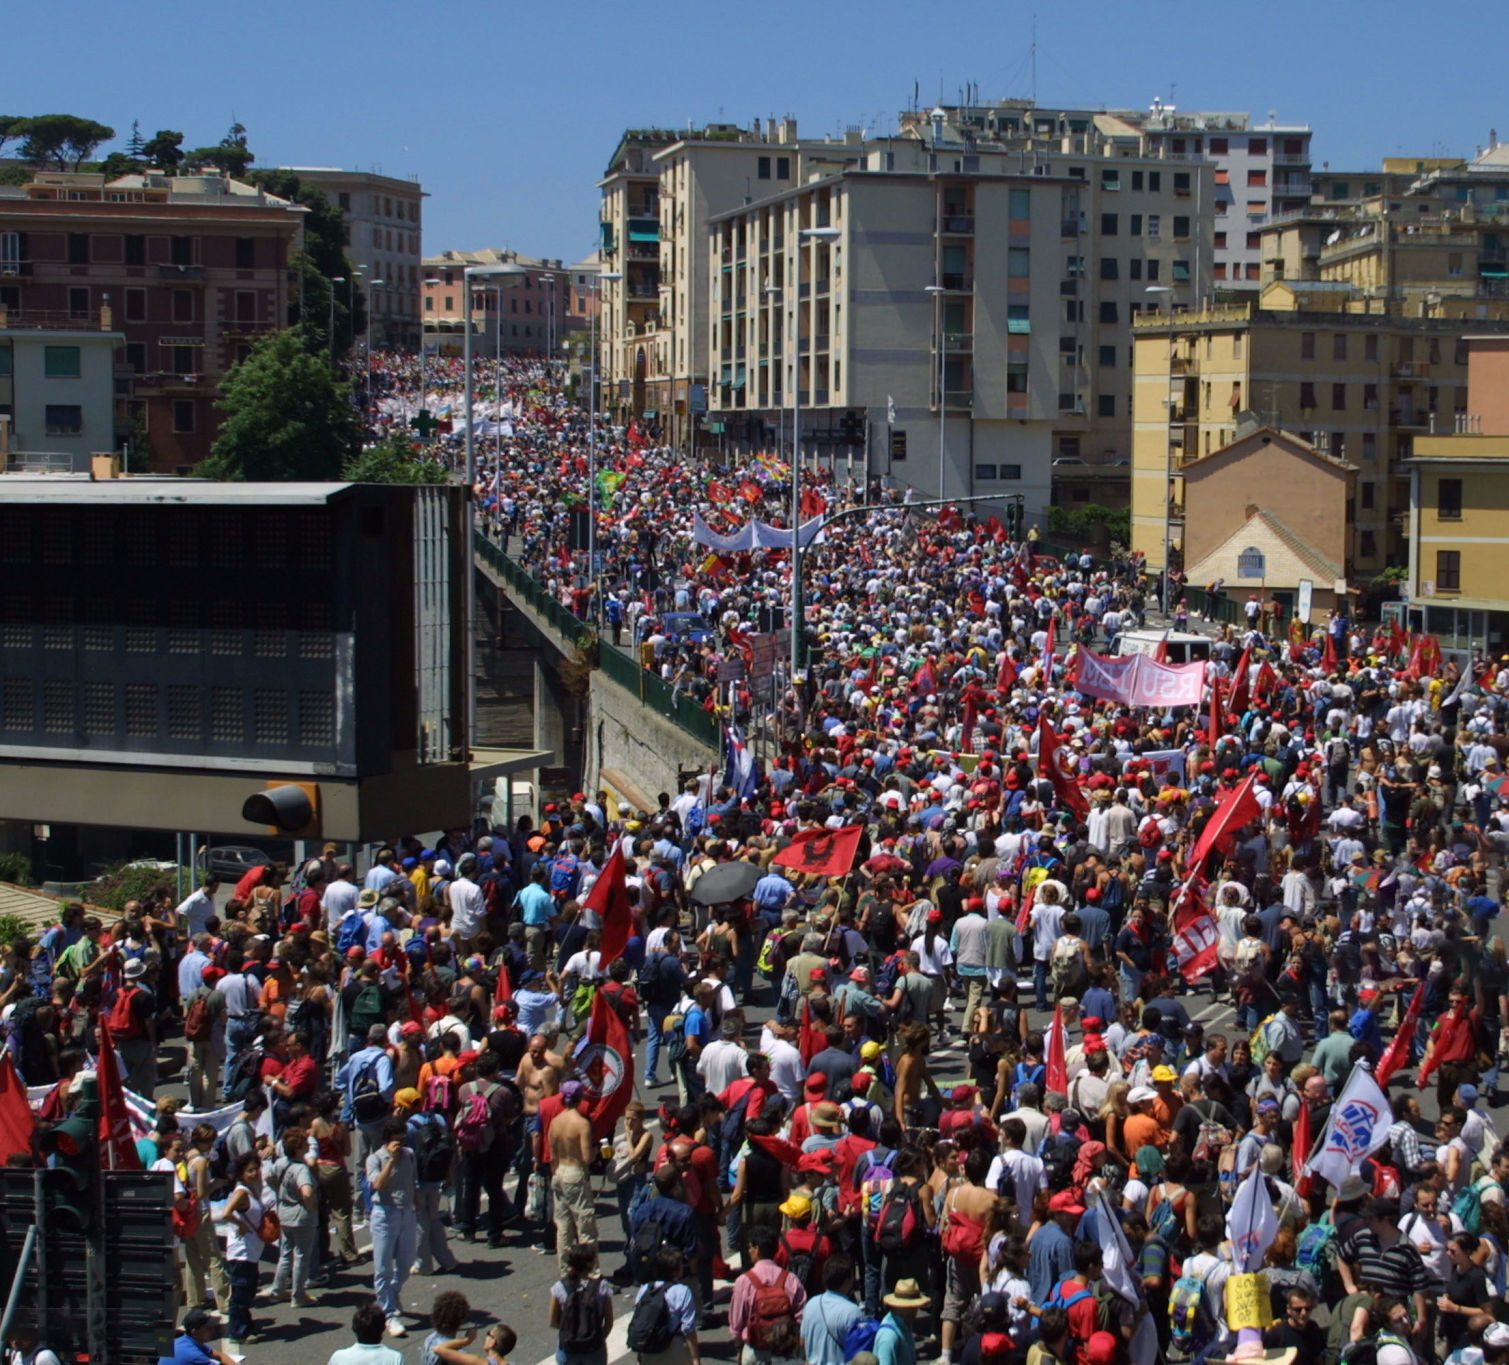 300,000 people march through Genoa on Saturday 21 July 2001 PHOTO: Getty Images